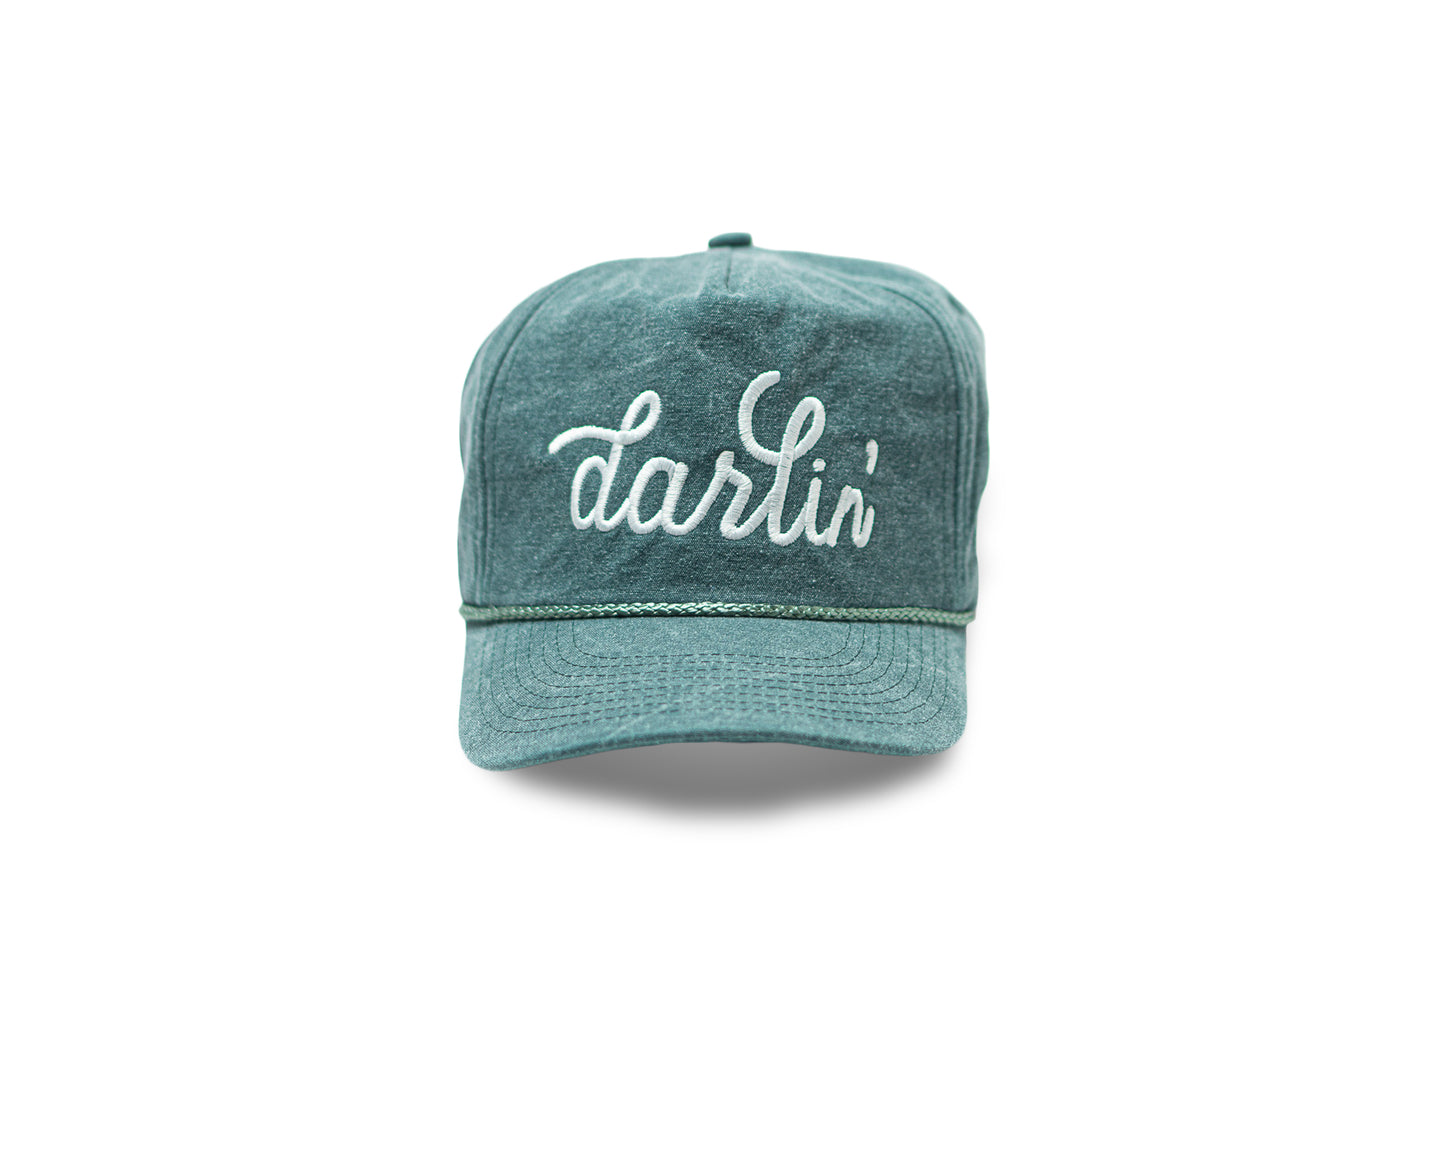 Moss Green and White Darlin’ Hat Stone Washed